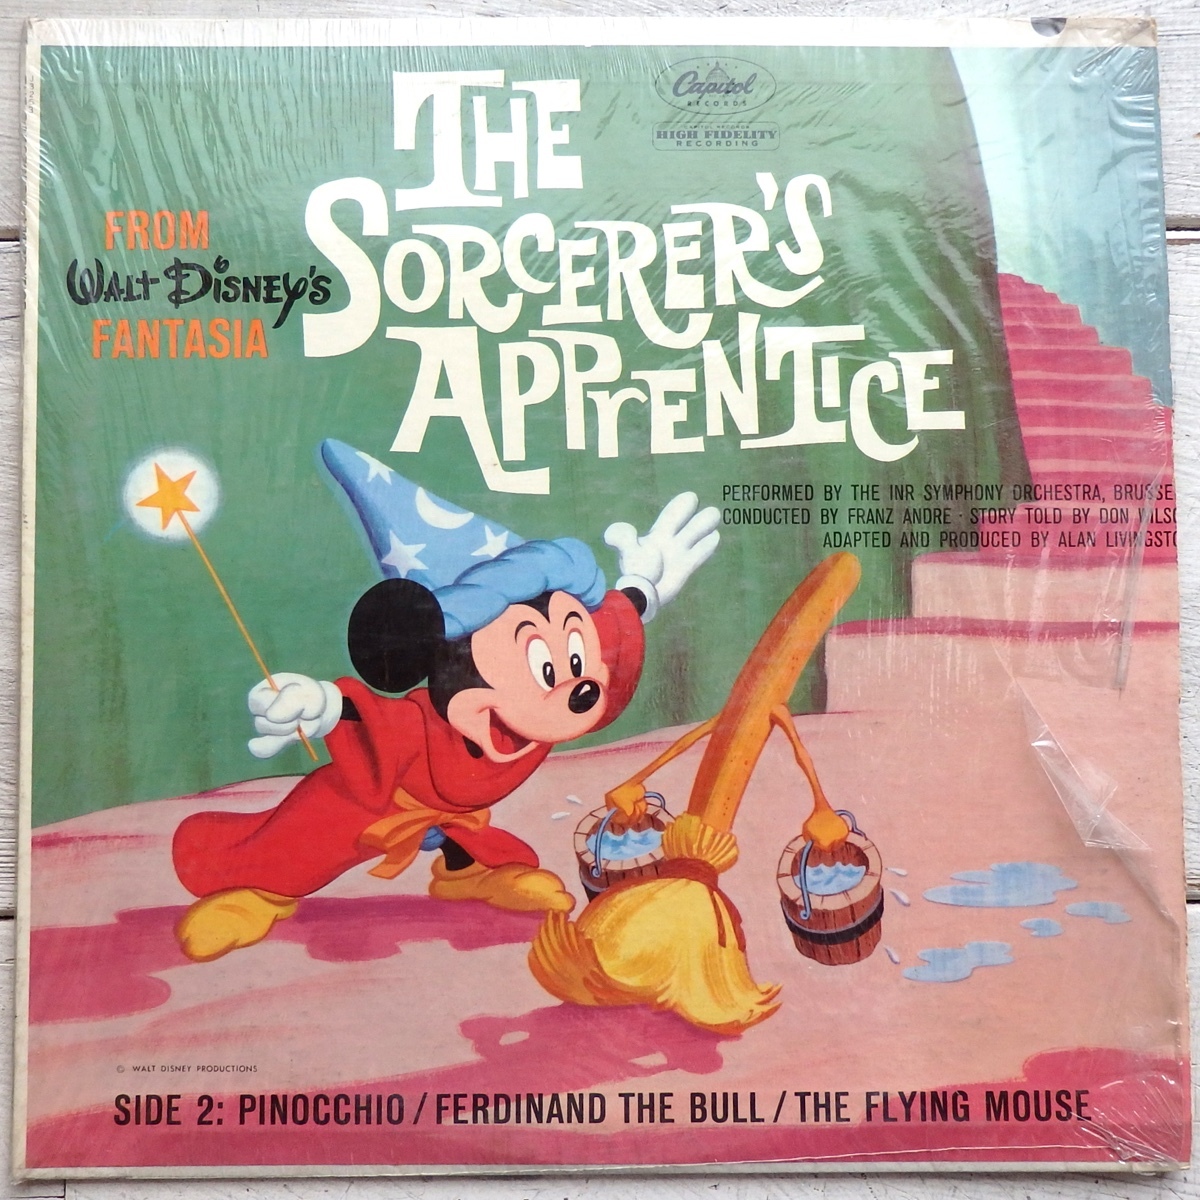 LP FROM WALT DISNEY\'S FANTASIA THE SORCERER\'S APPRENTICE PINOCCHIO FERDINAND THE BULL THE FLYING MOUSE J-3253 rice record tis knee 